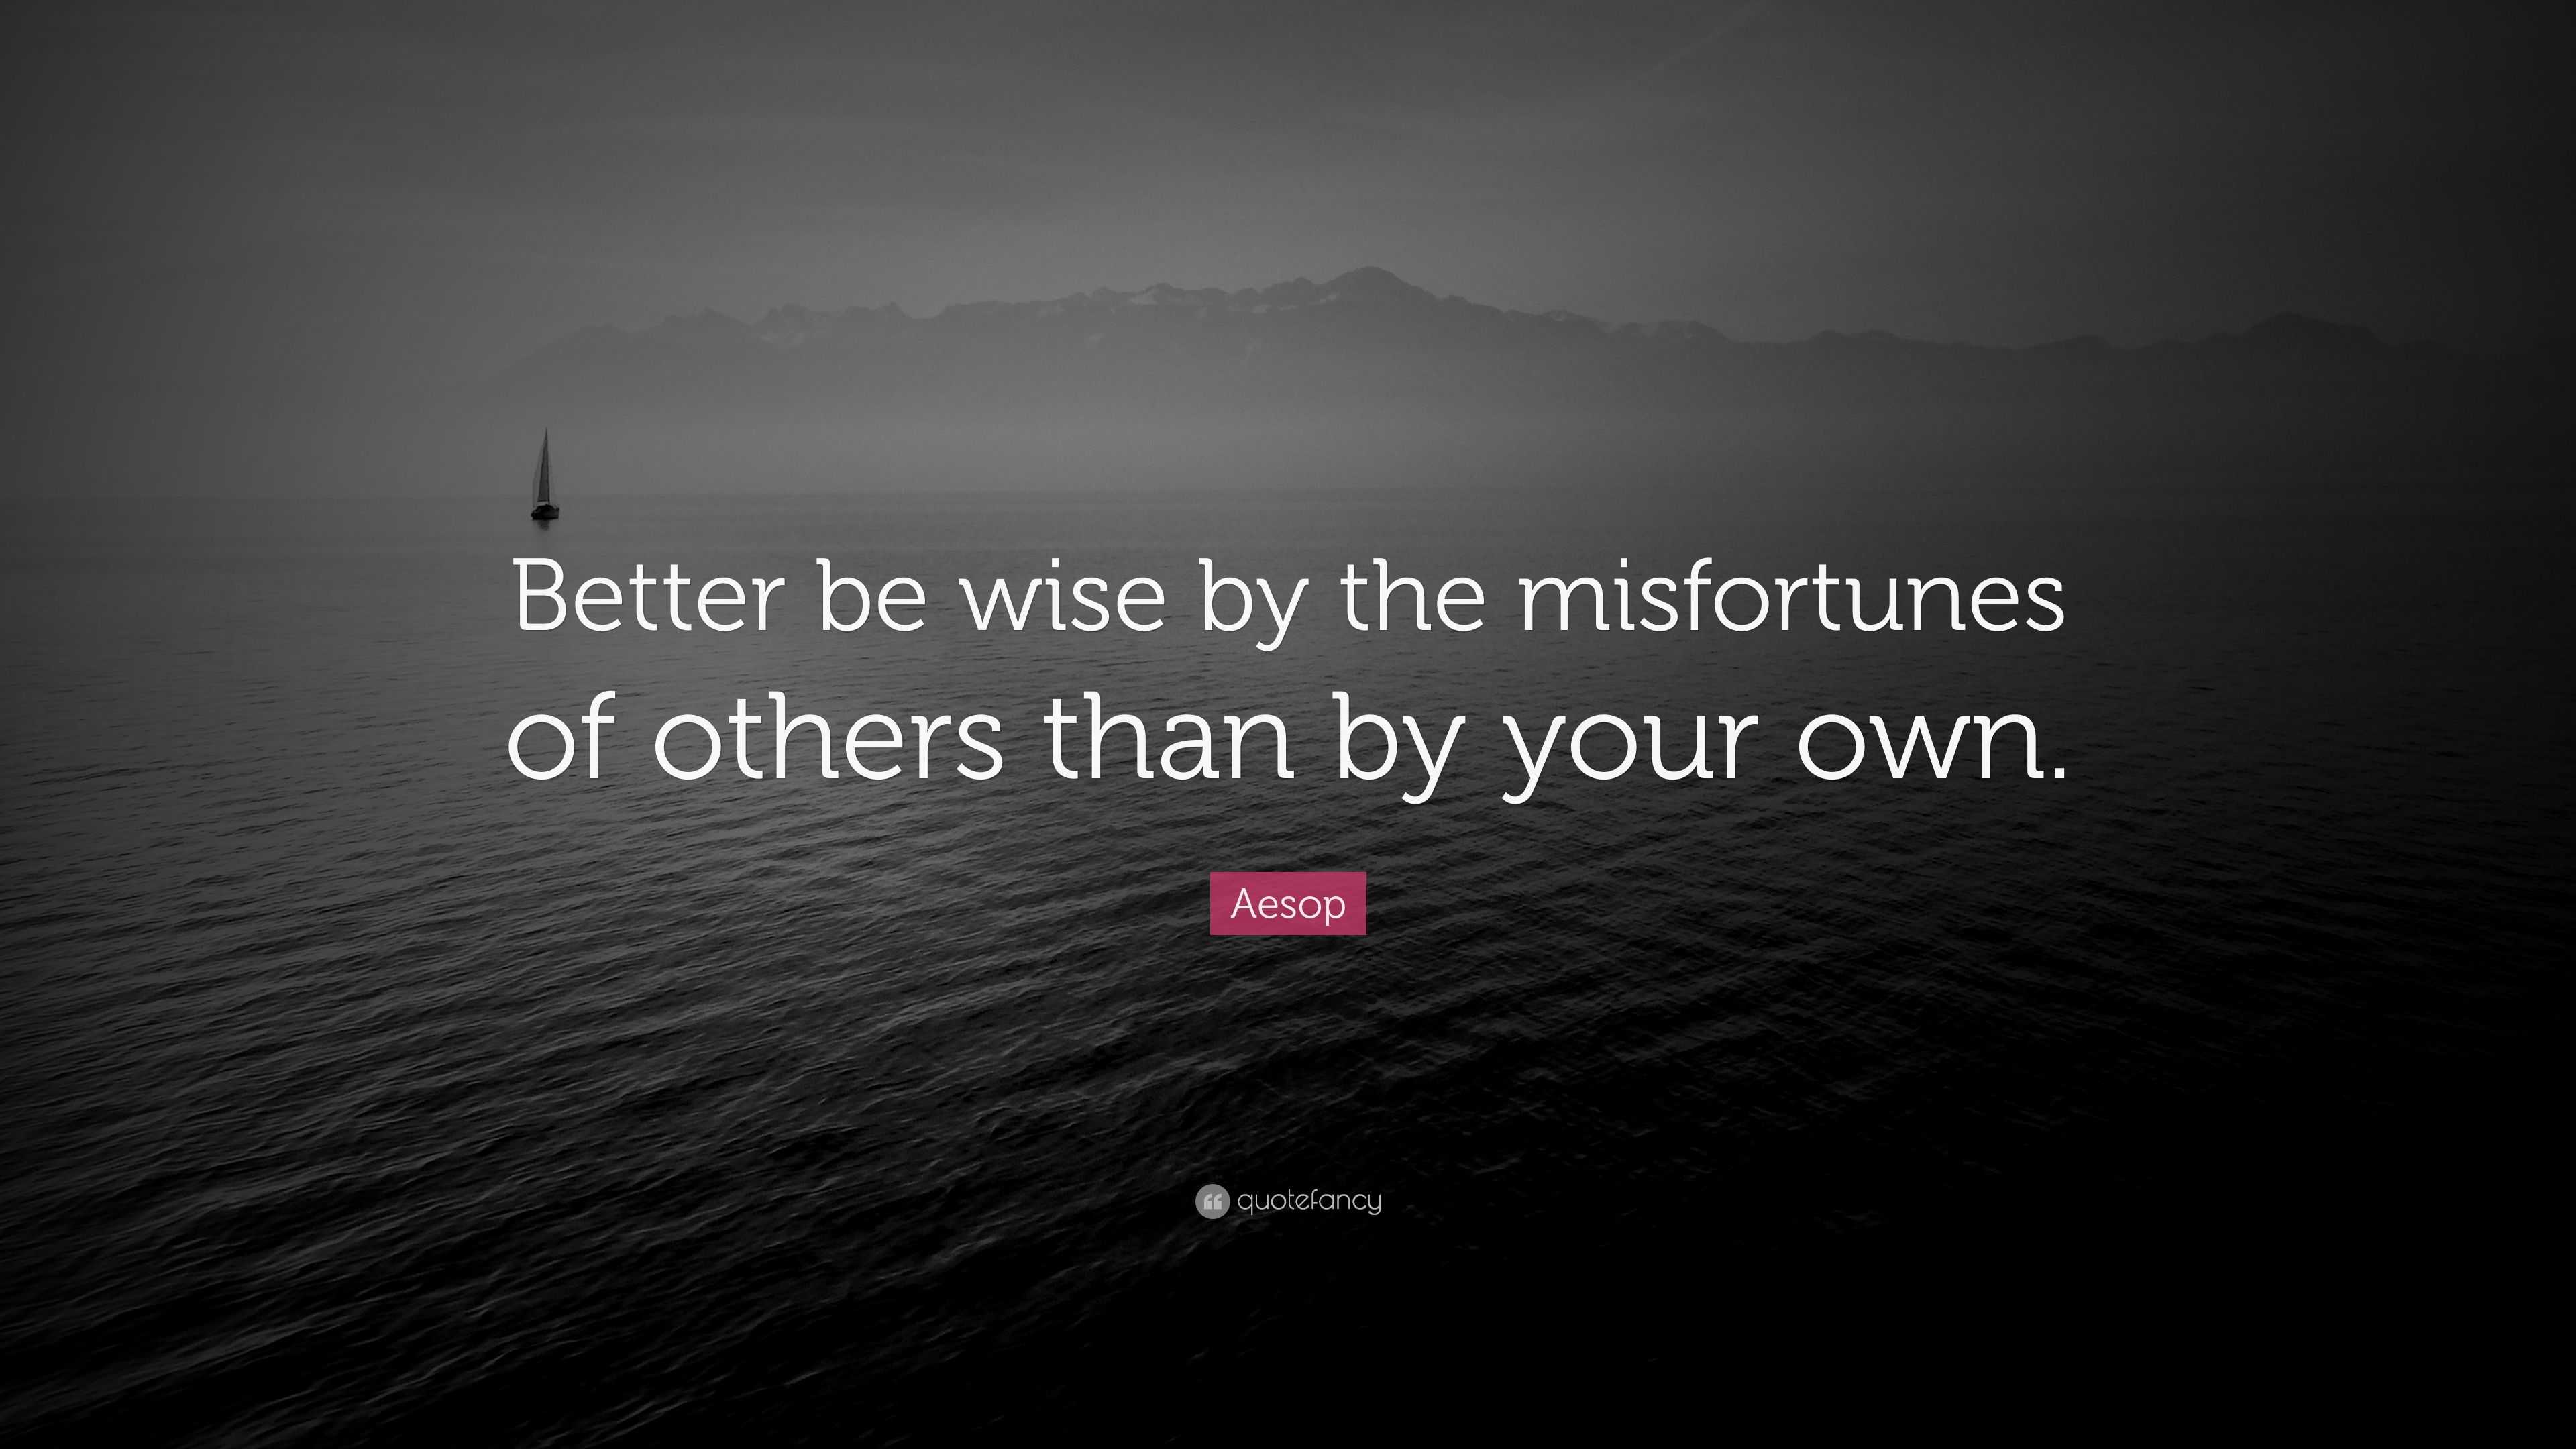 Aesop Quote: “Better be wise by the misfortunes of others than by your ...